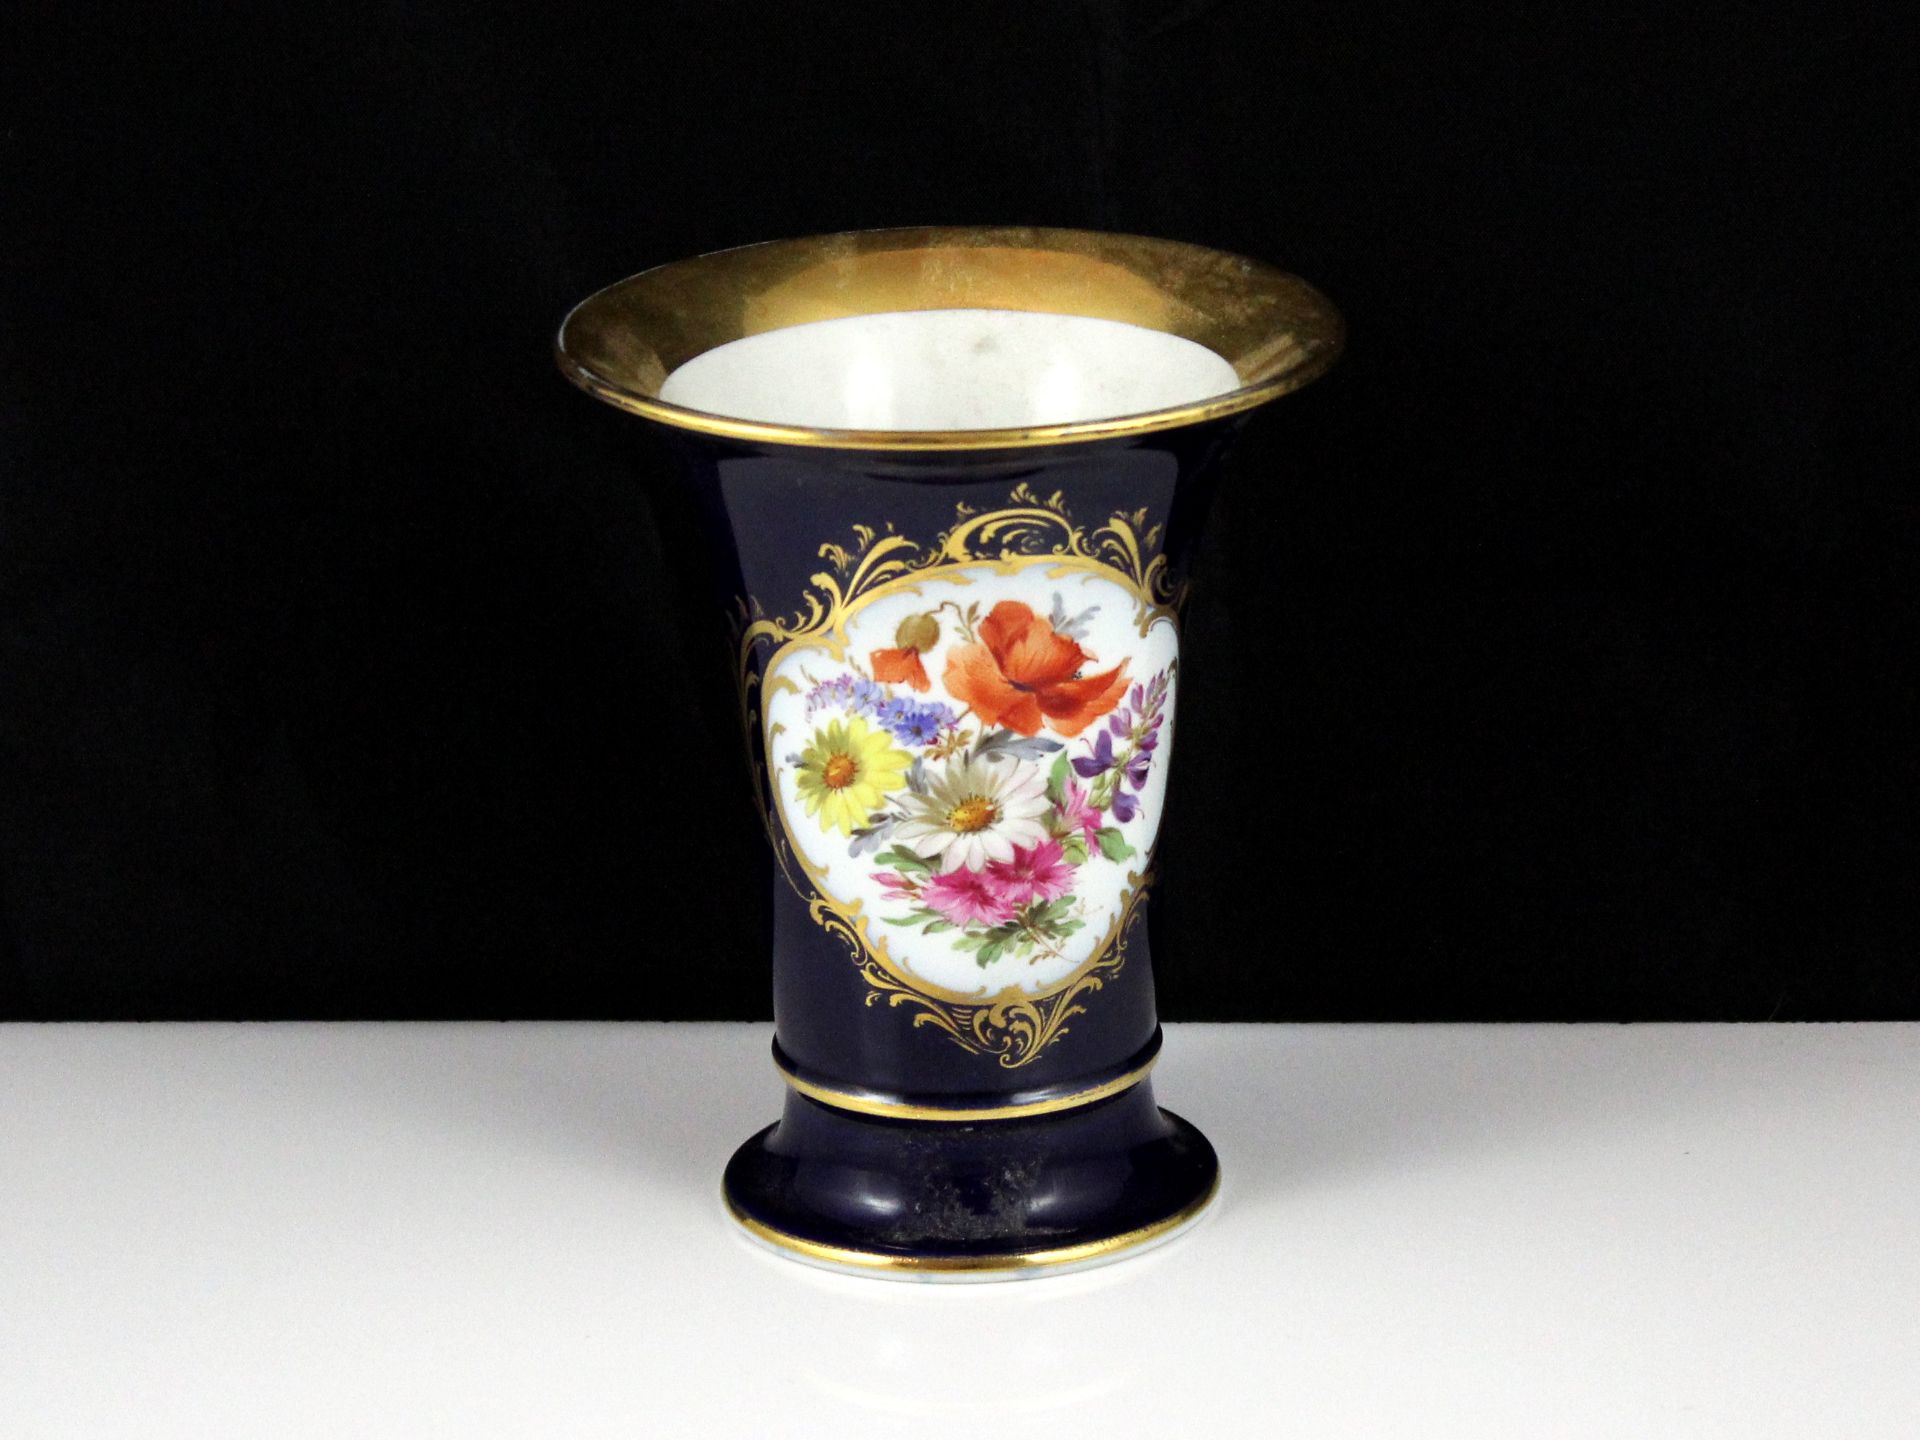 An antique late 19th / early 20th Century Meissen porcelain vase, of tapering form with a flared